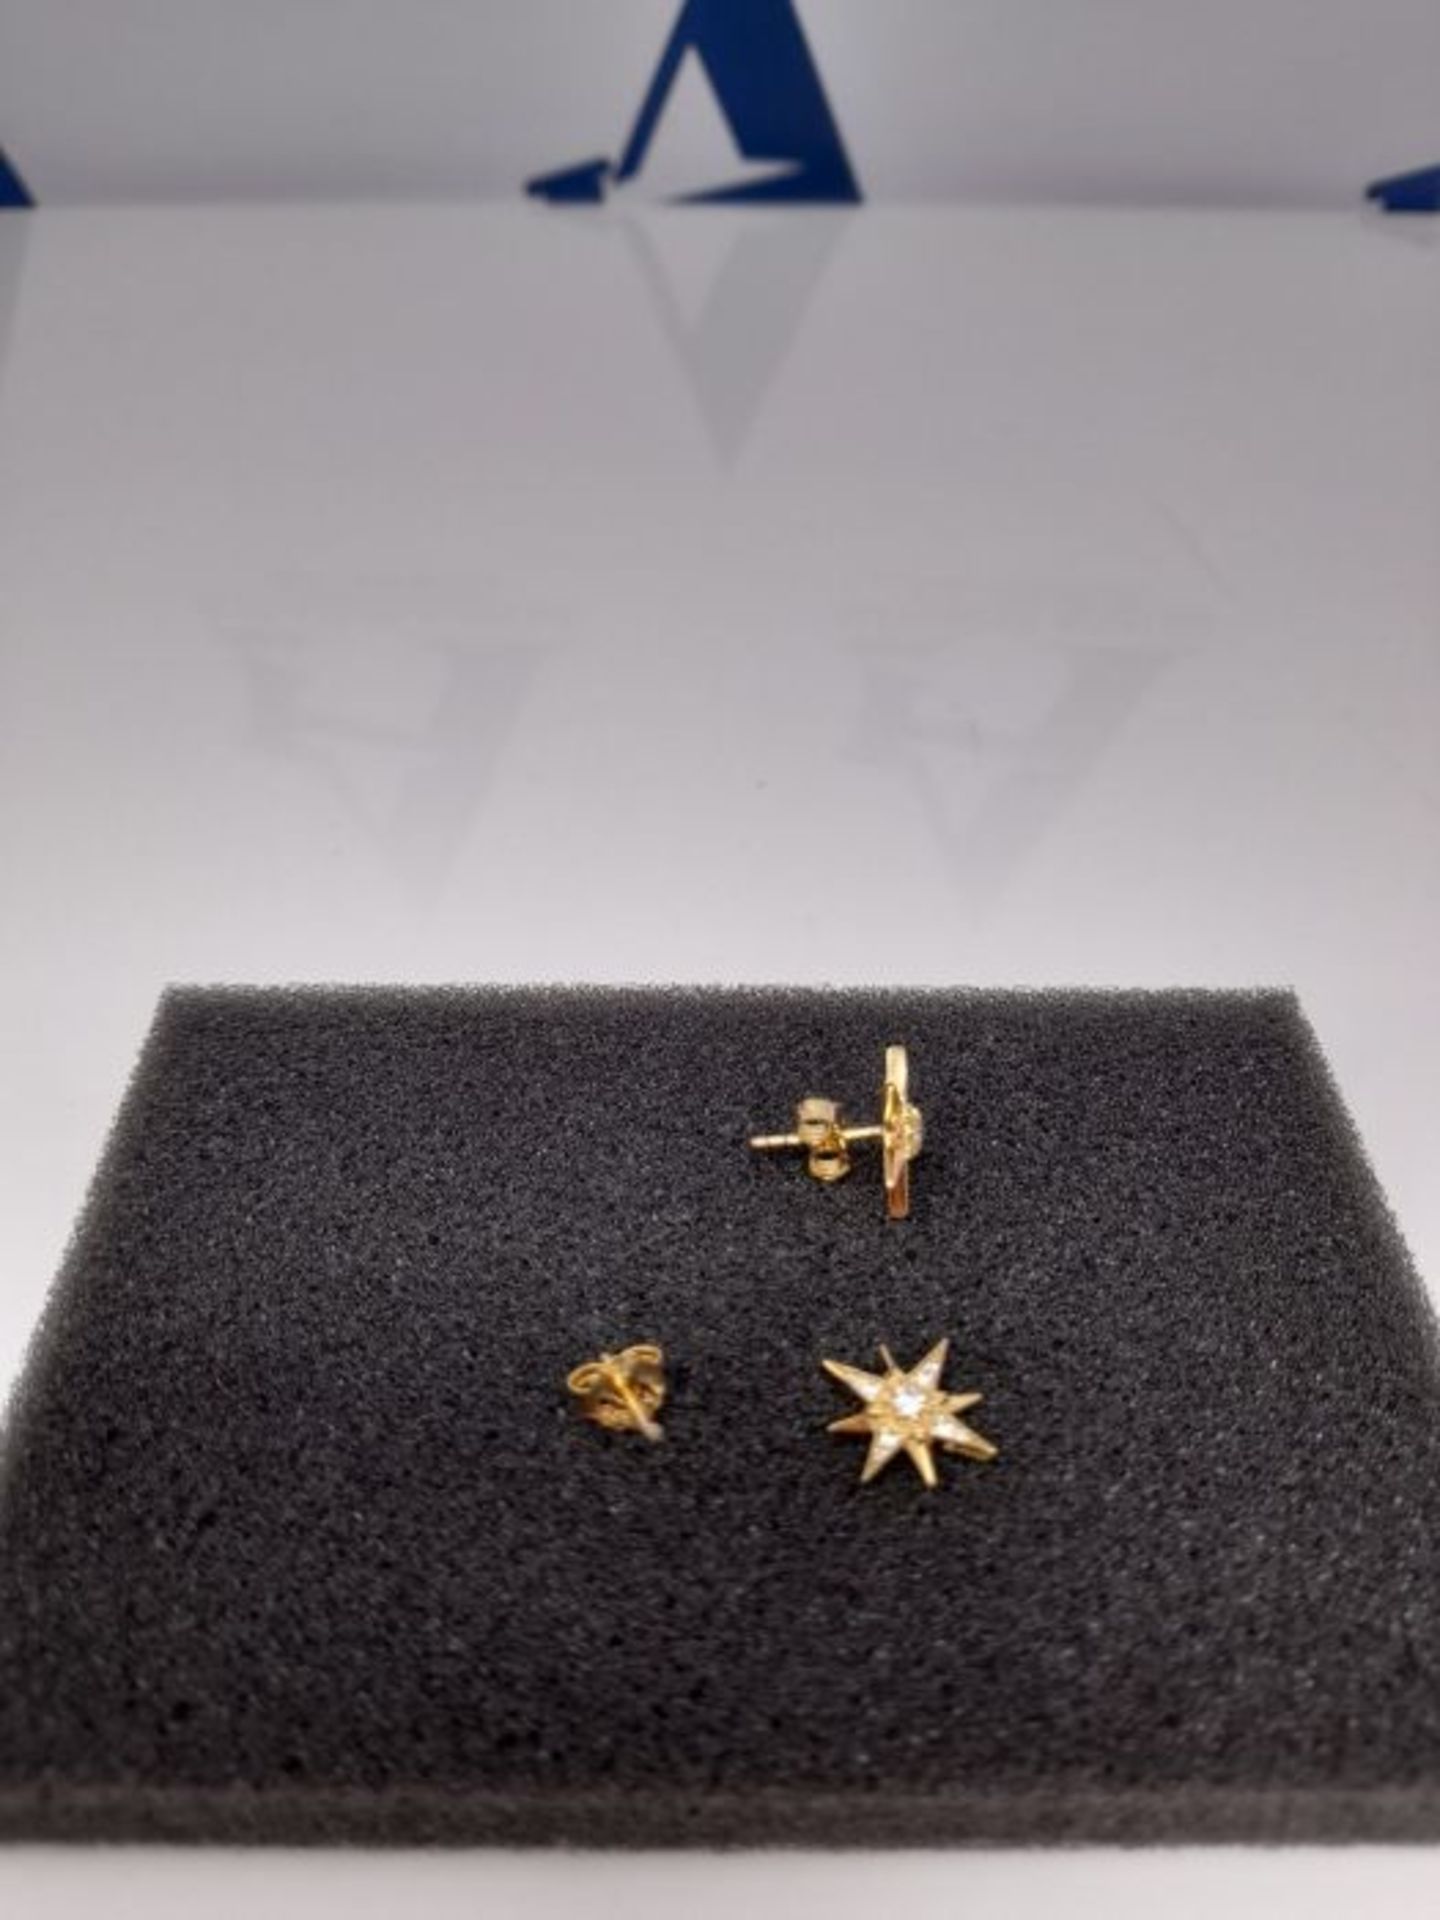 RRP £55.00 [CRACKED] Thomas Sabo Women Stud Earrings Star 925 Sterling Silver H2081-414-14 - Image 3 of 3